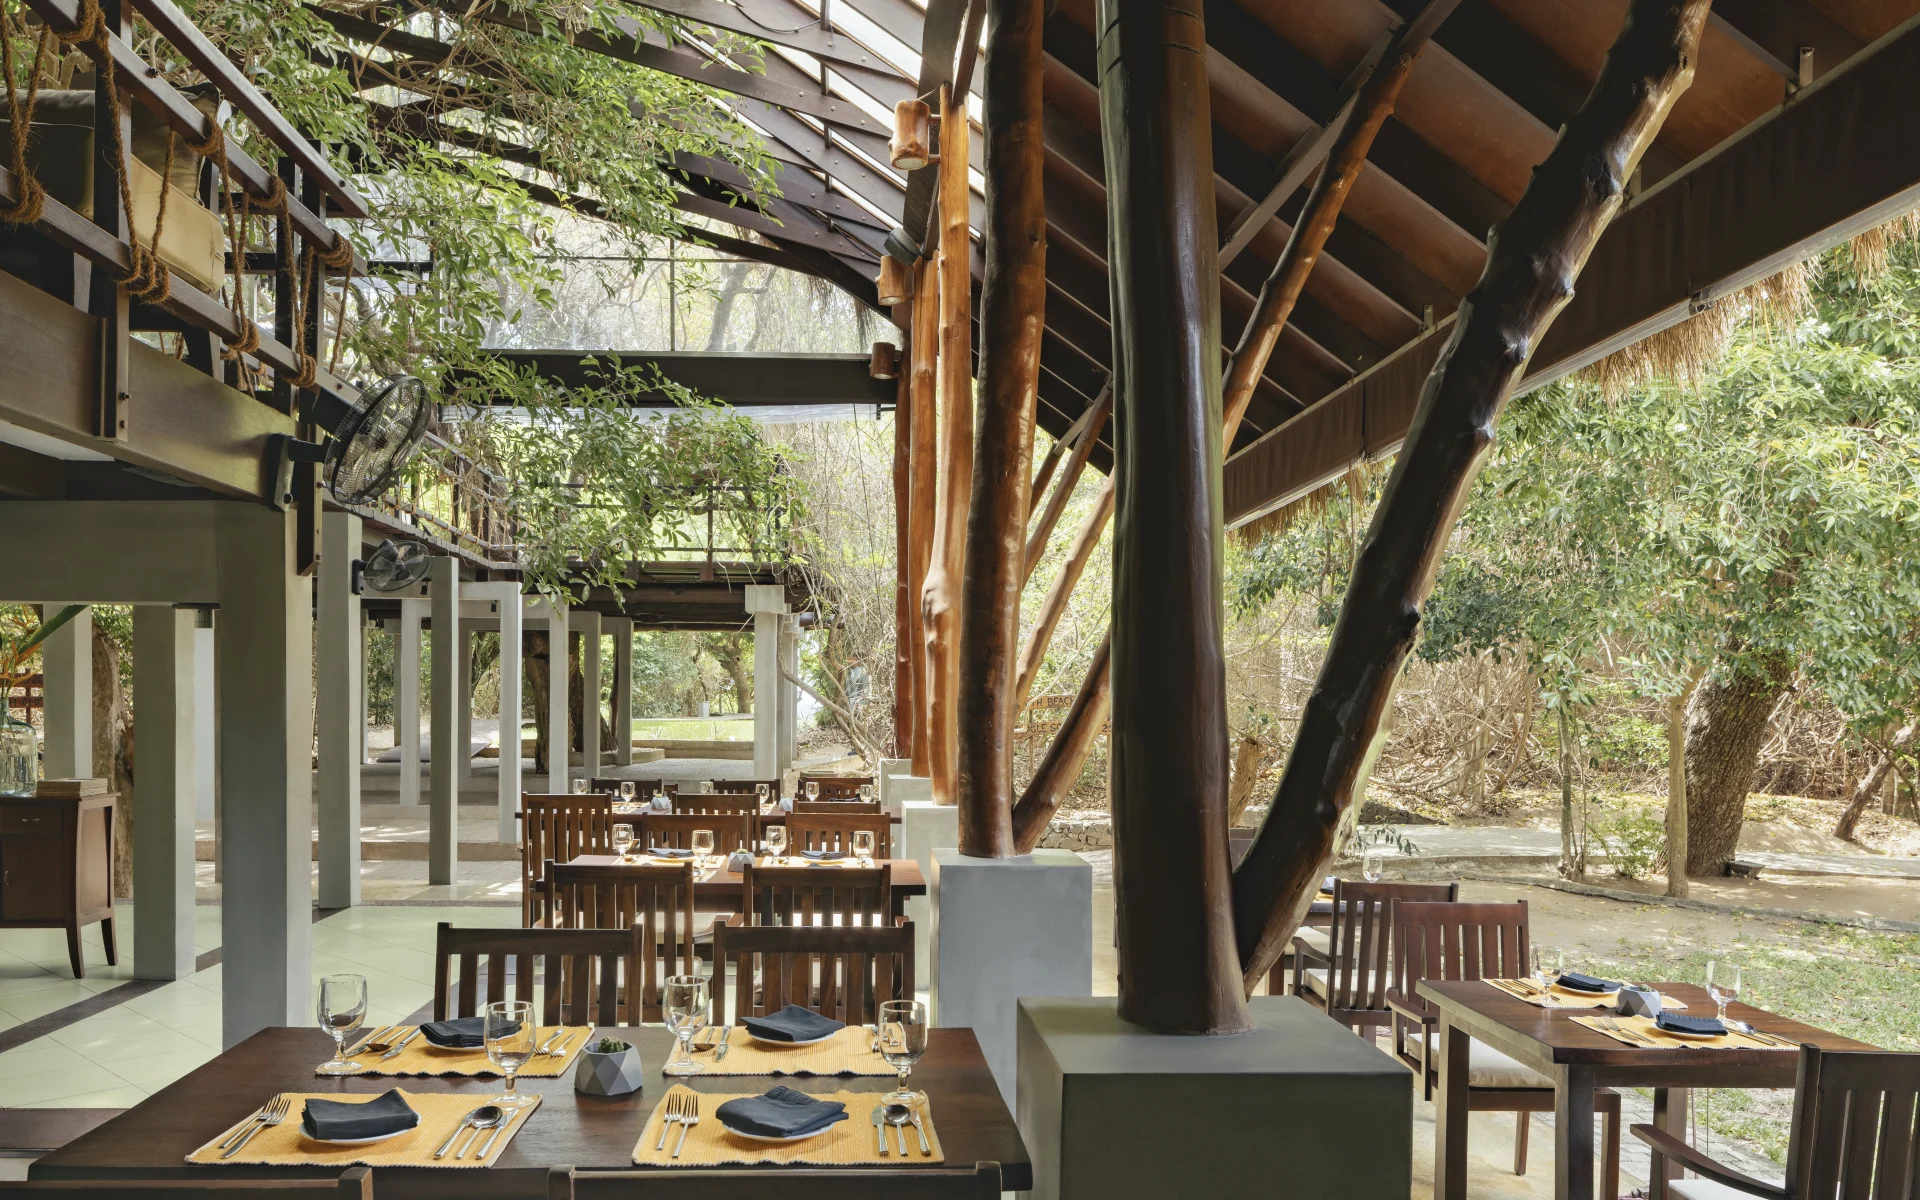 The Jungle Beach restaurant is open-air and adopts a rustic luxury style.